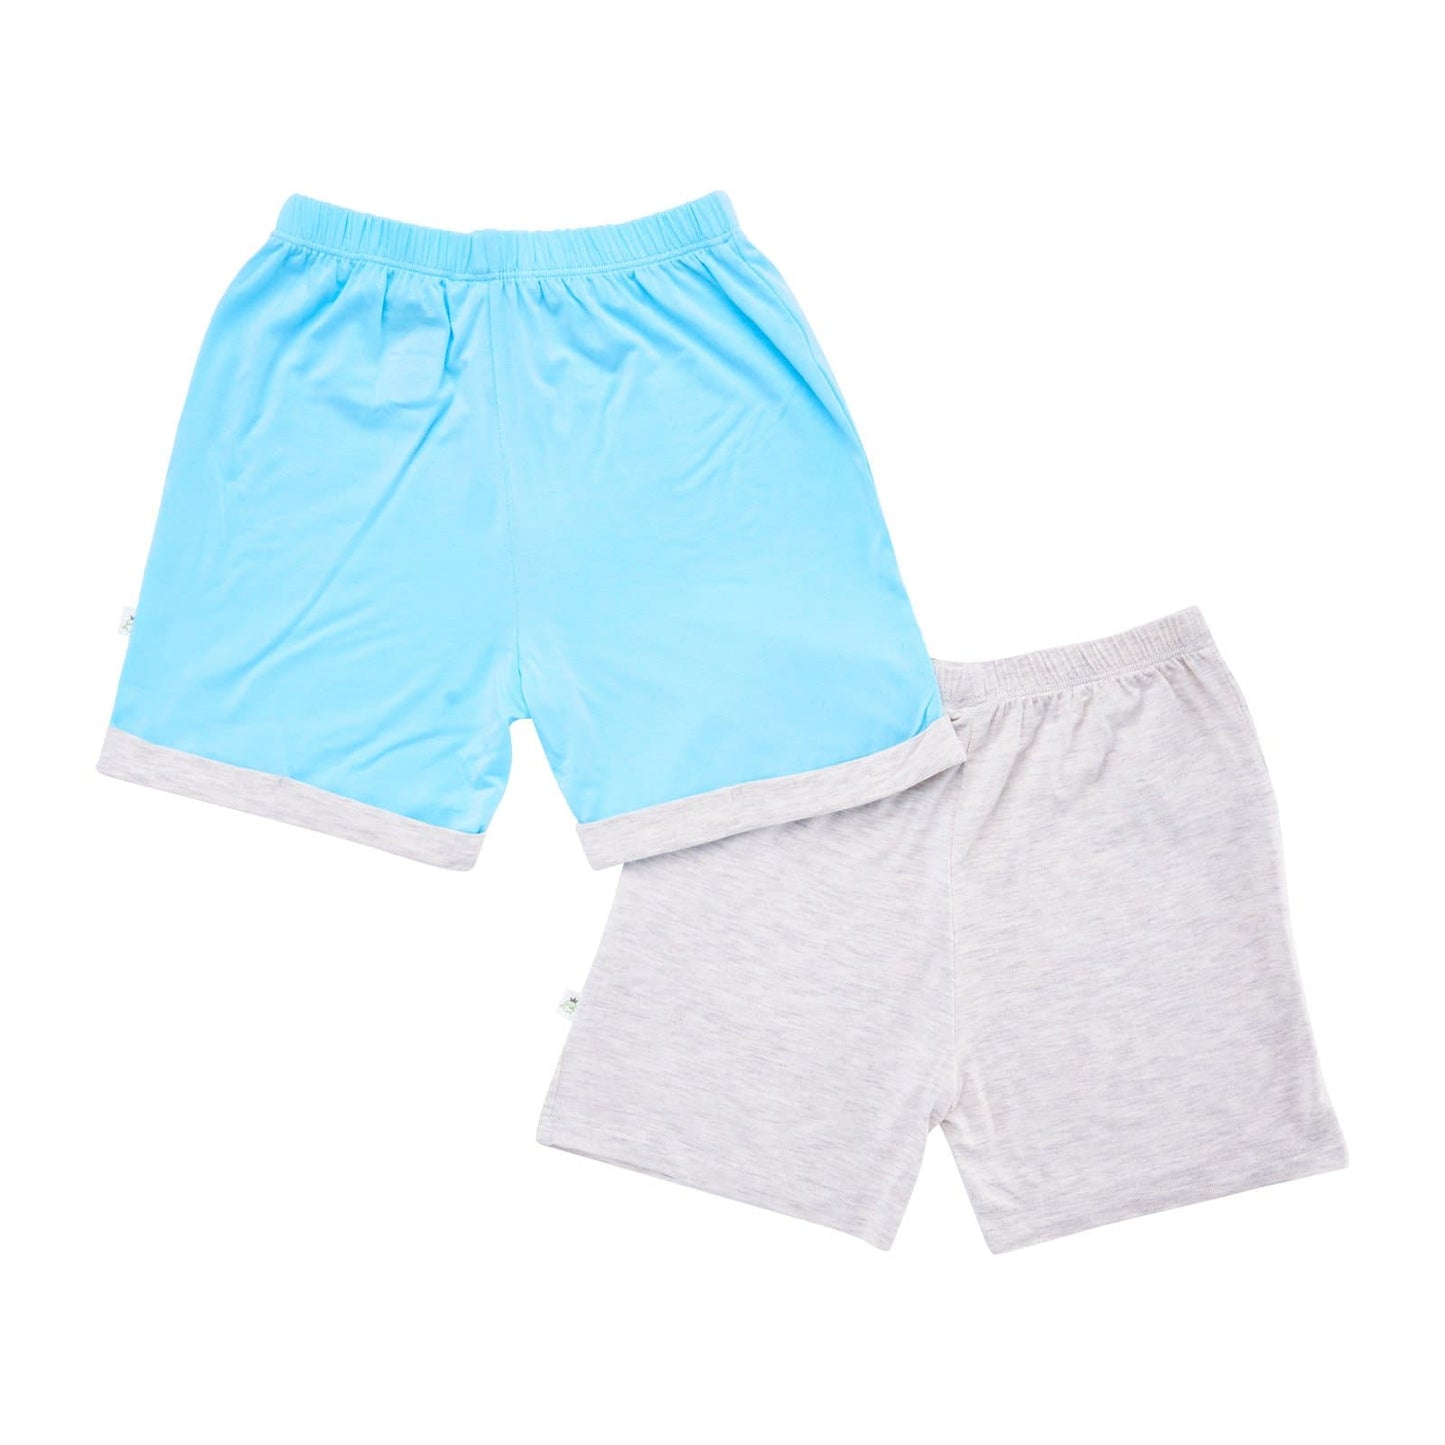 Turquoise & Grey - Kids Shorts (Pack of 2)